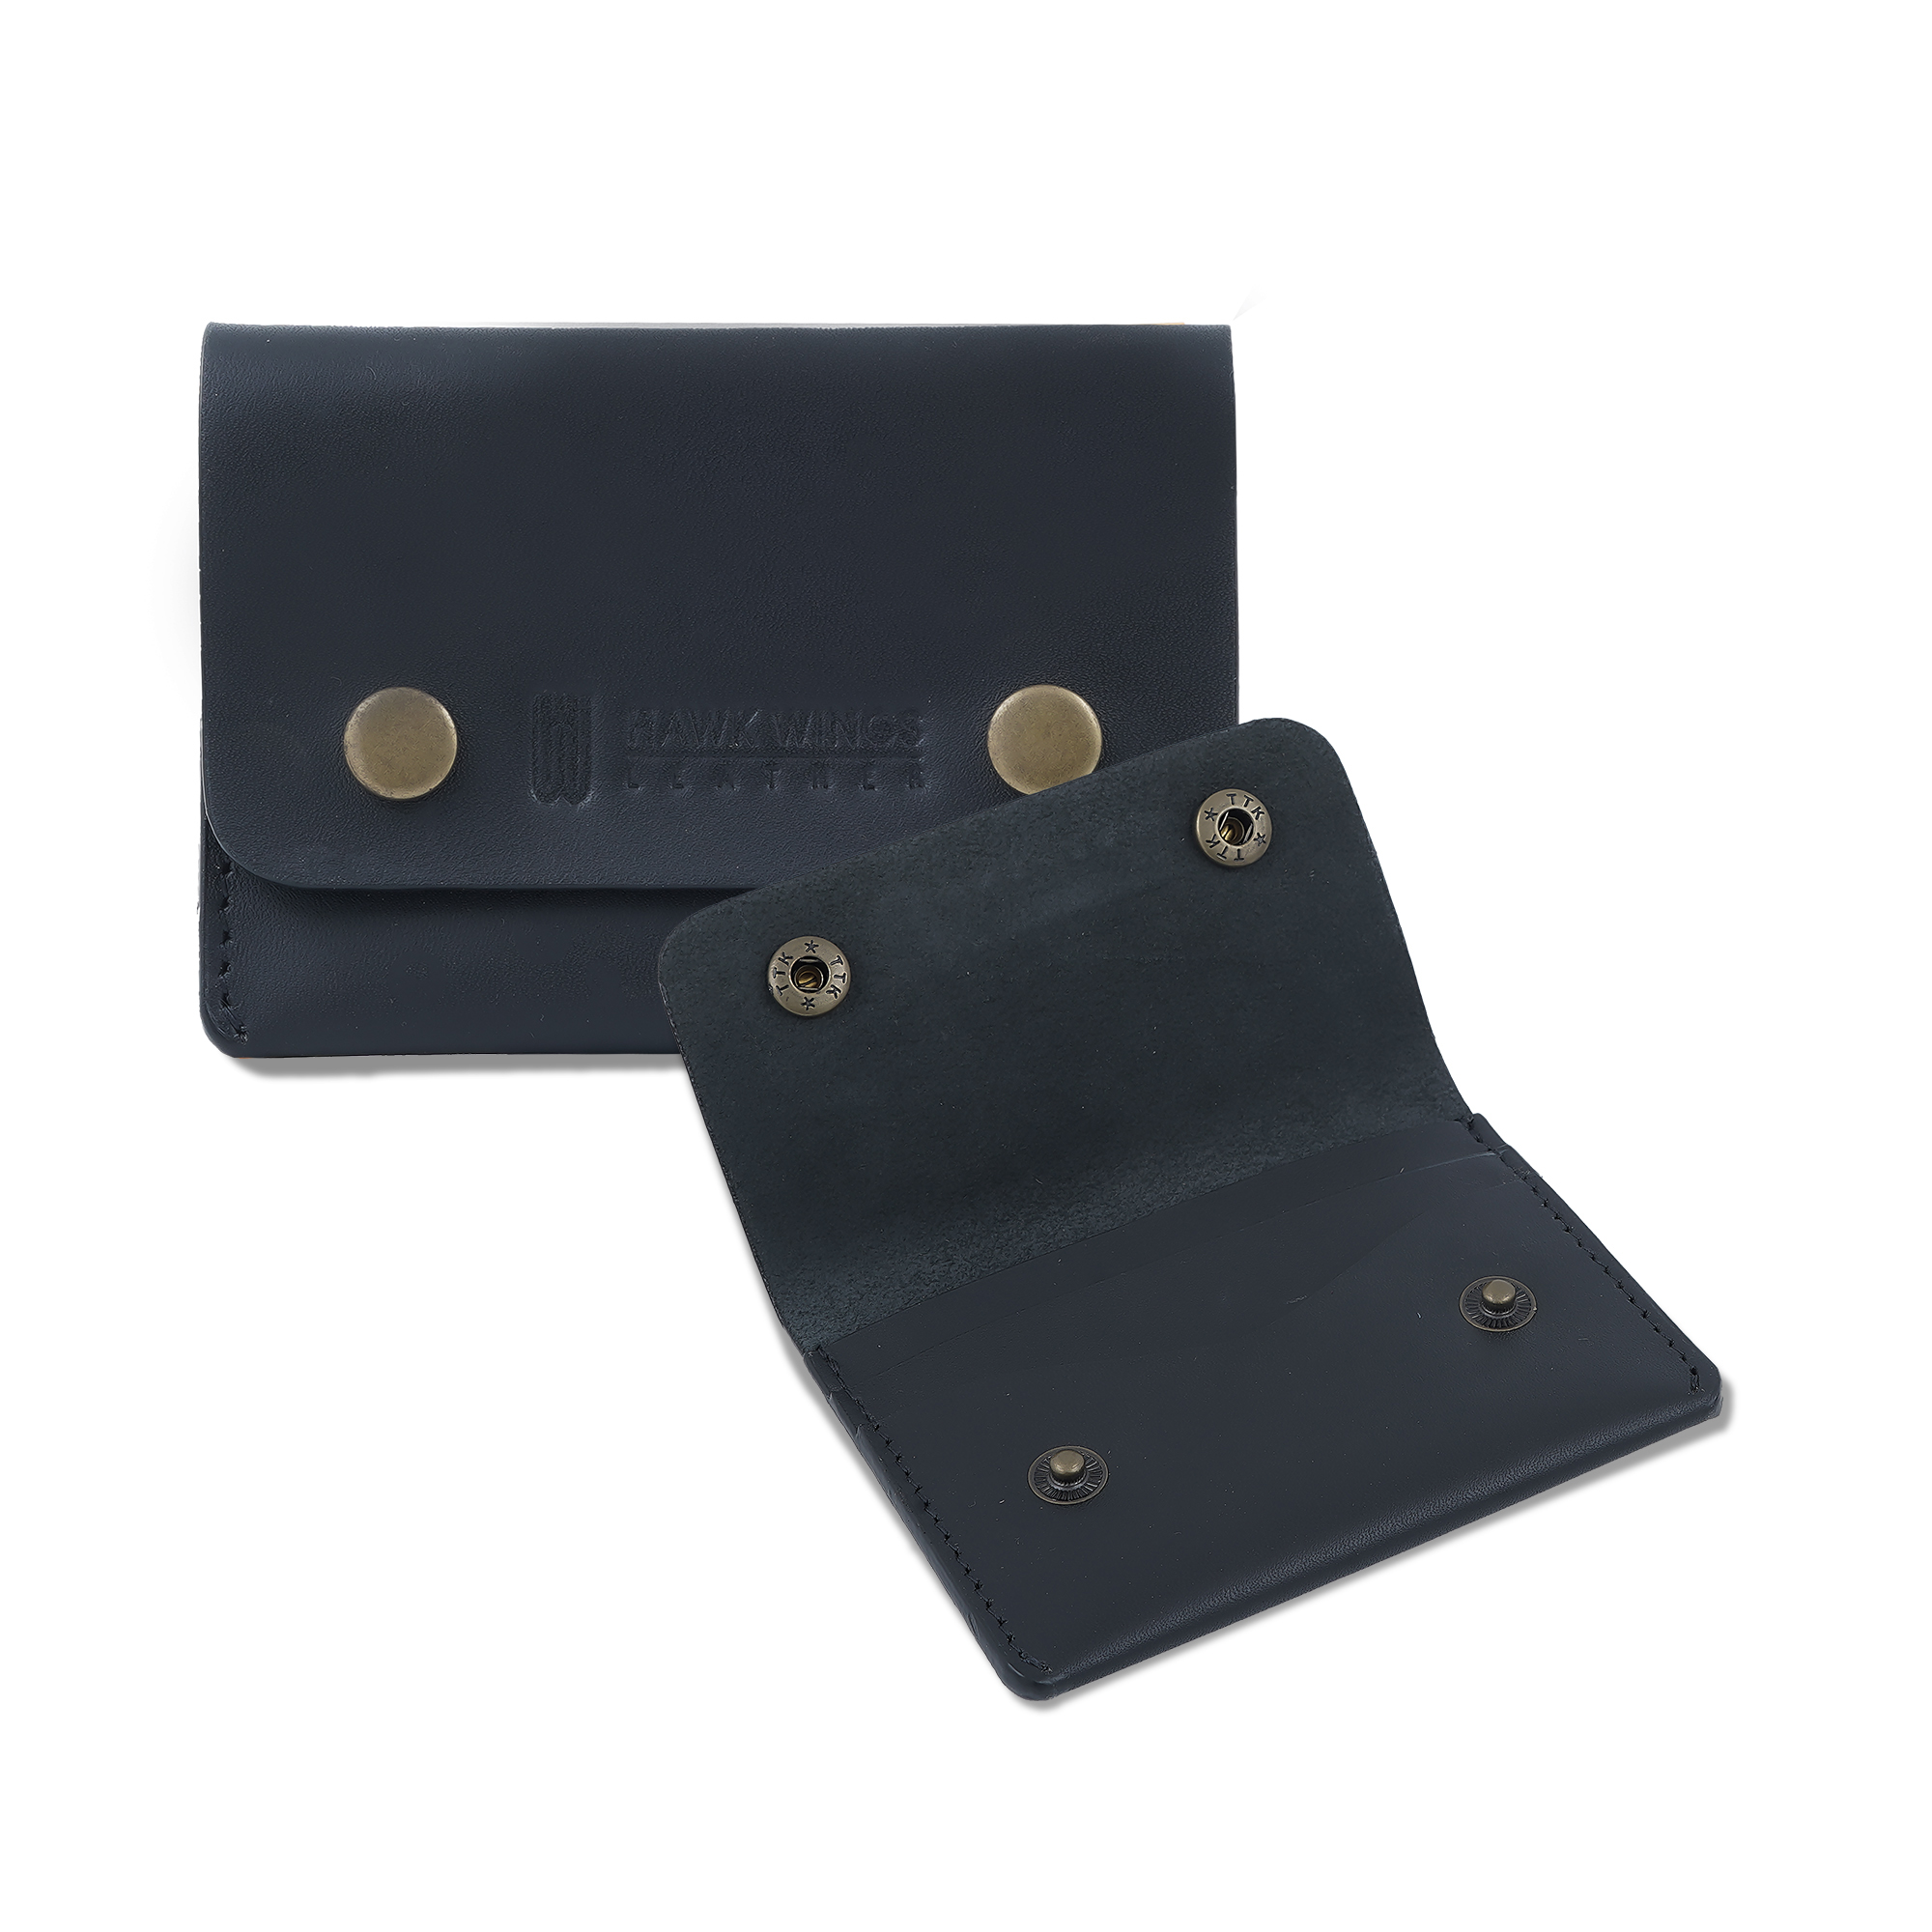  Leather Riveted Wallet for Men and Women  | Black-asset-311